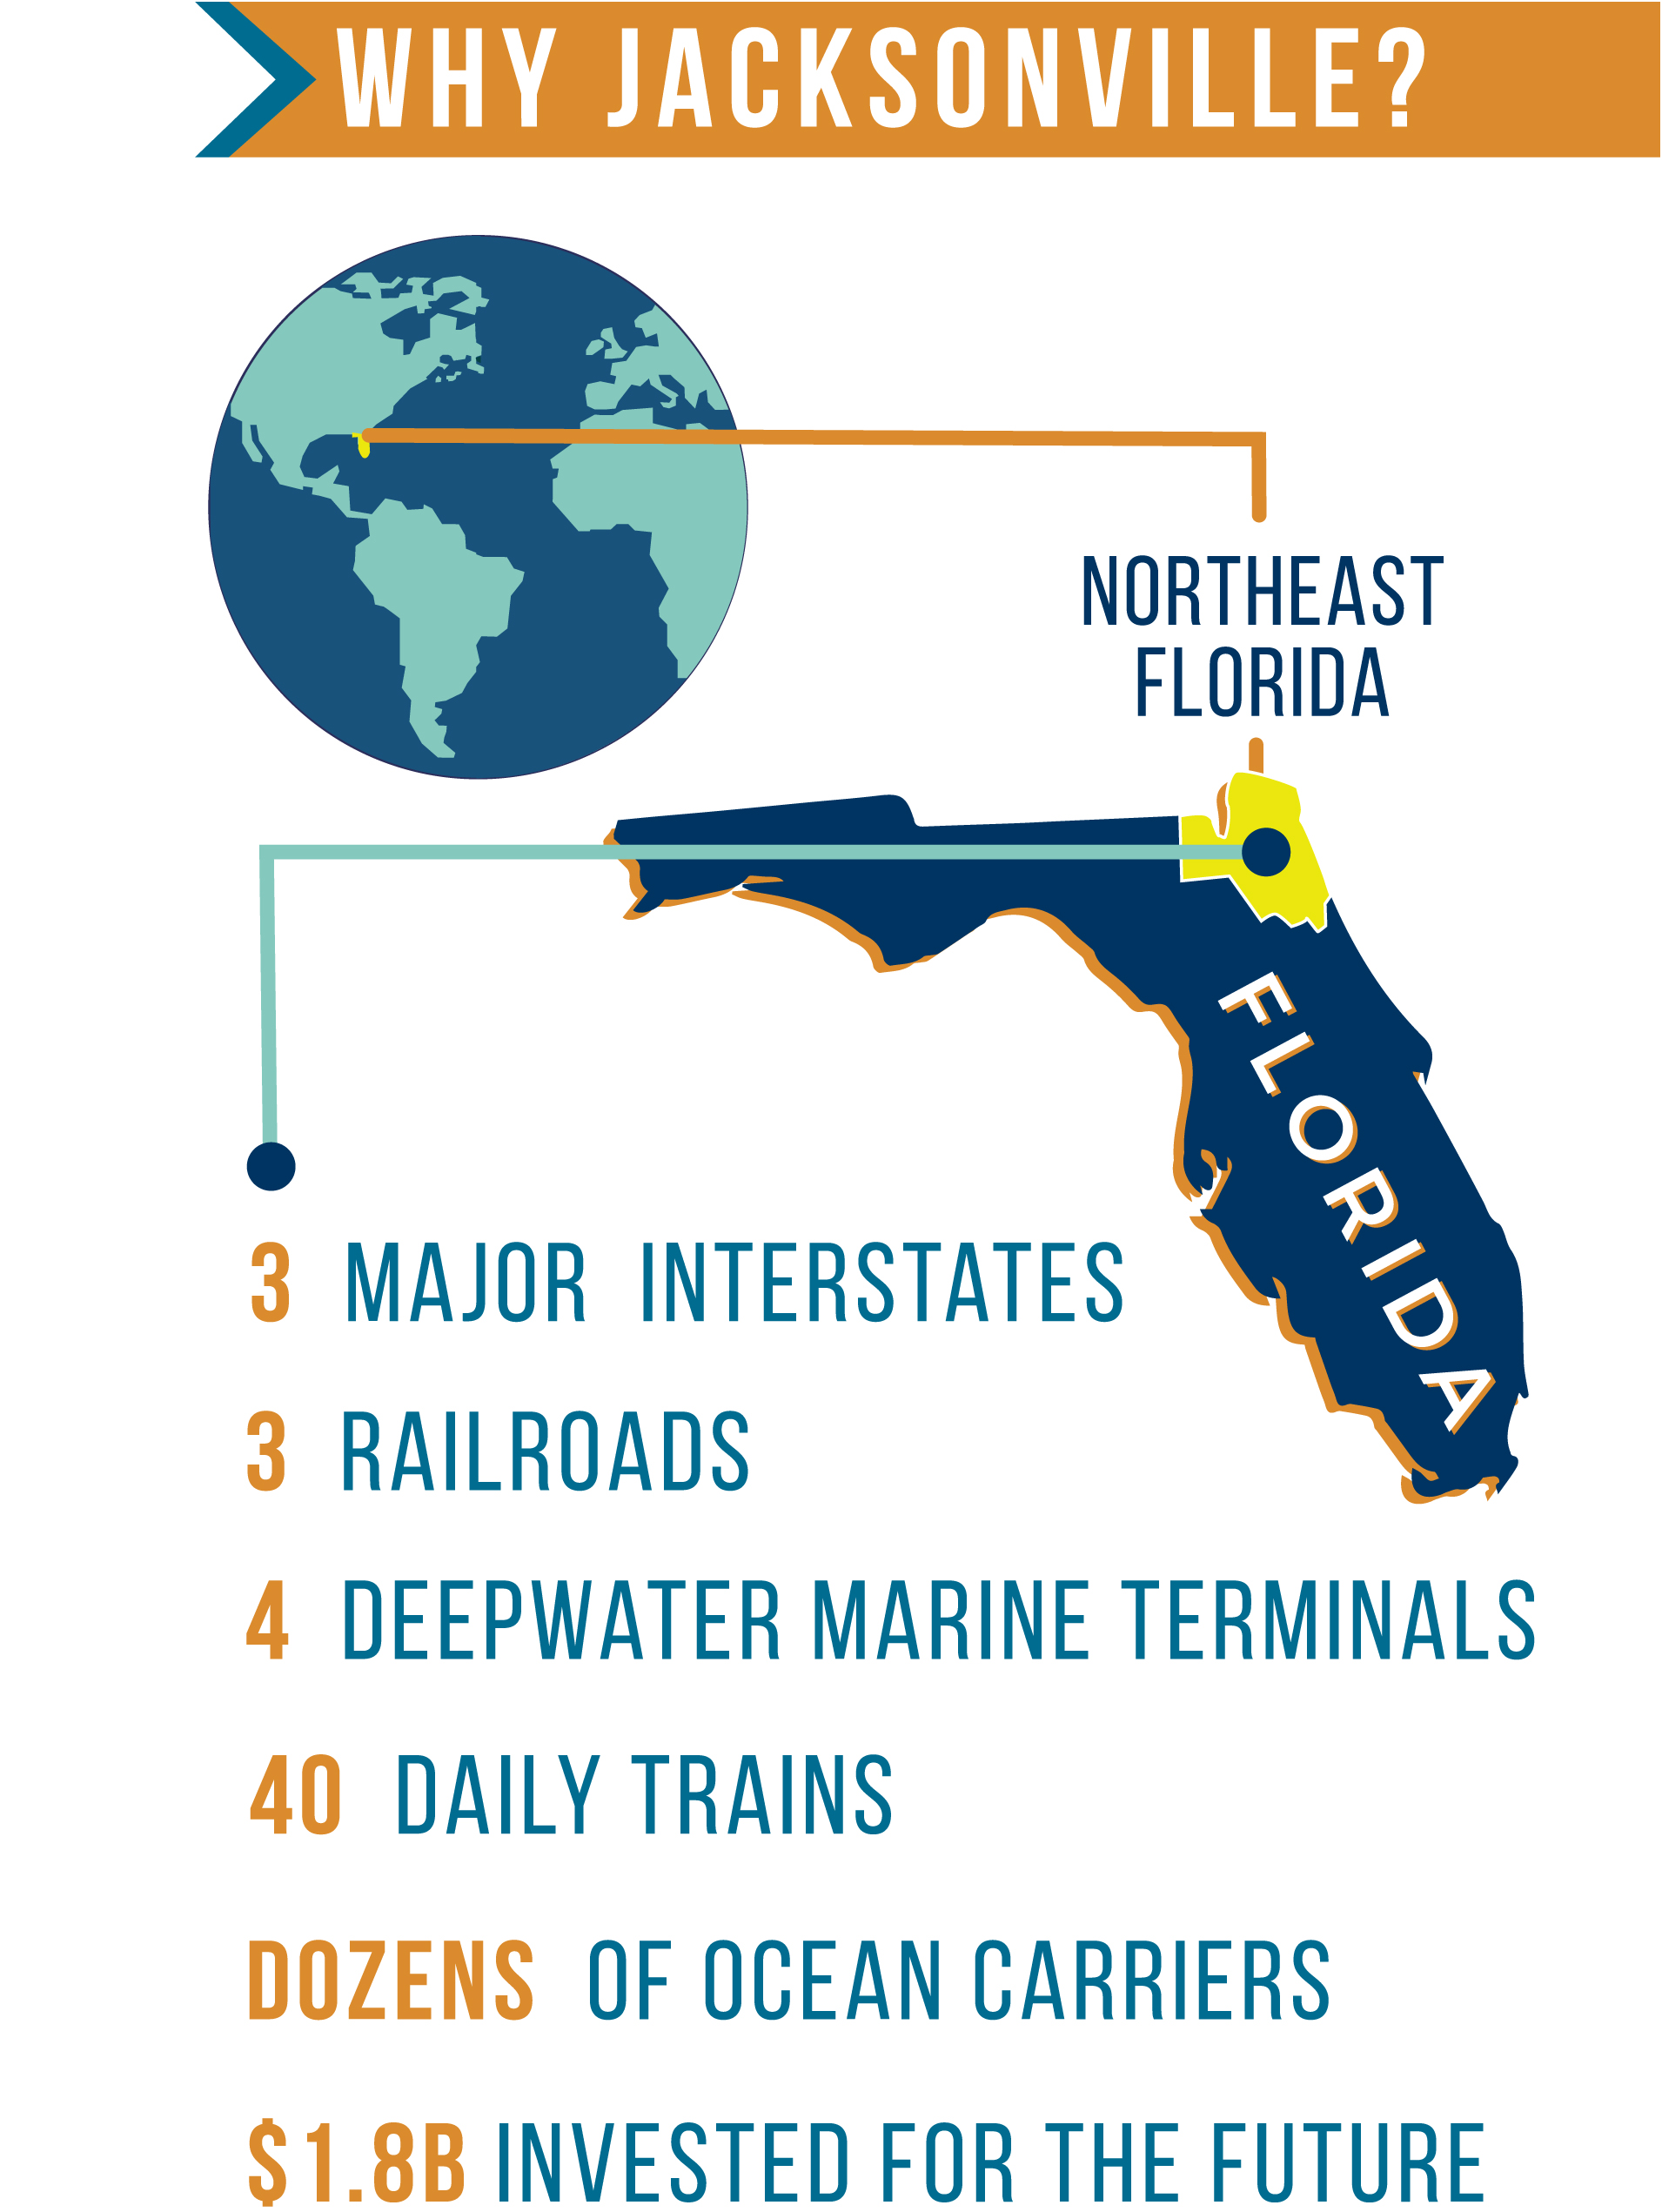 A JAXPORT infographic provides good reasons to use the port and its facilities. (Image: JAXPORT)